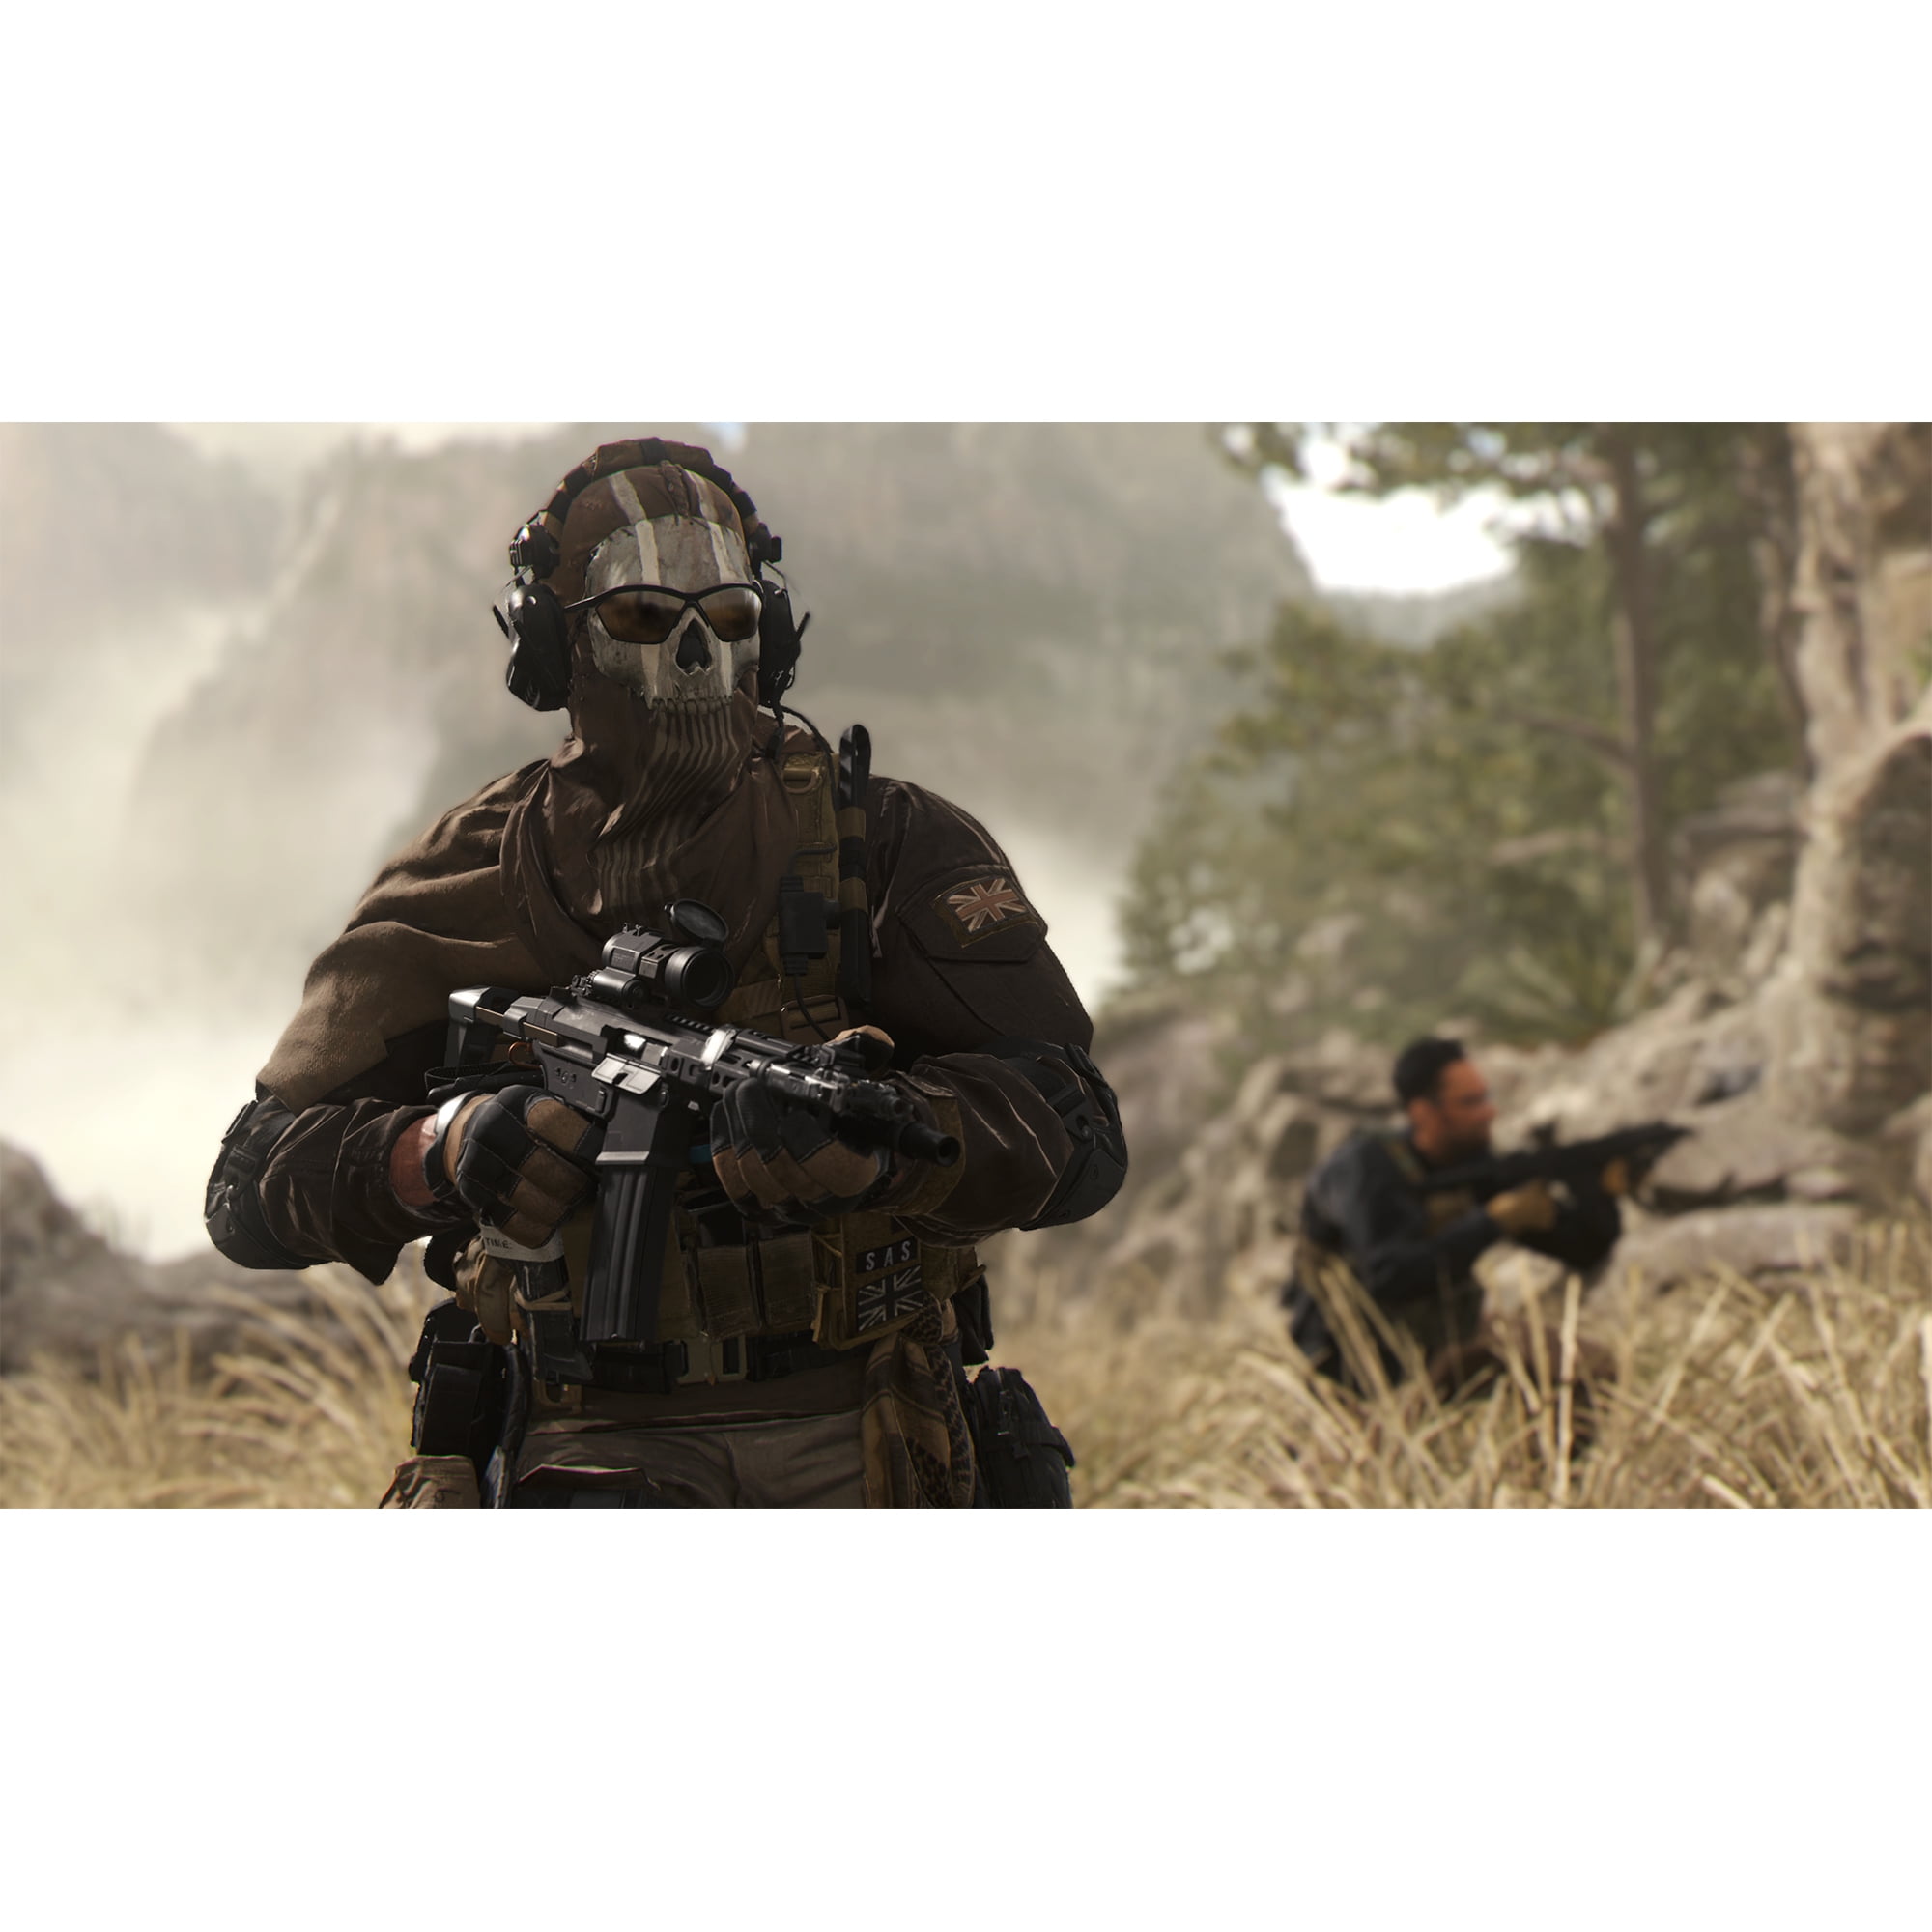  Call of Duty: Modern Warfare II - PlayStation 4 : Activision  Inc: Everything Else